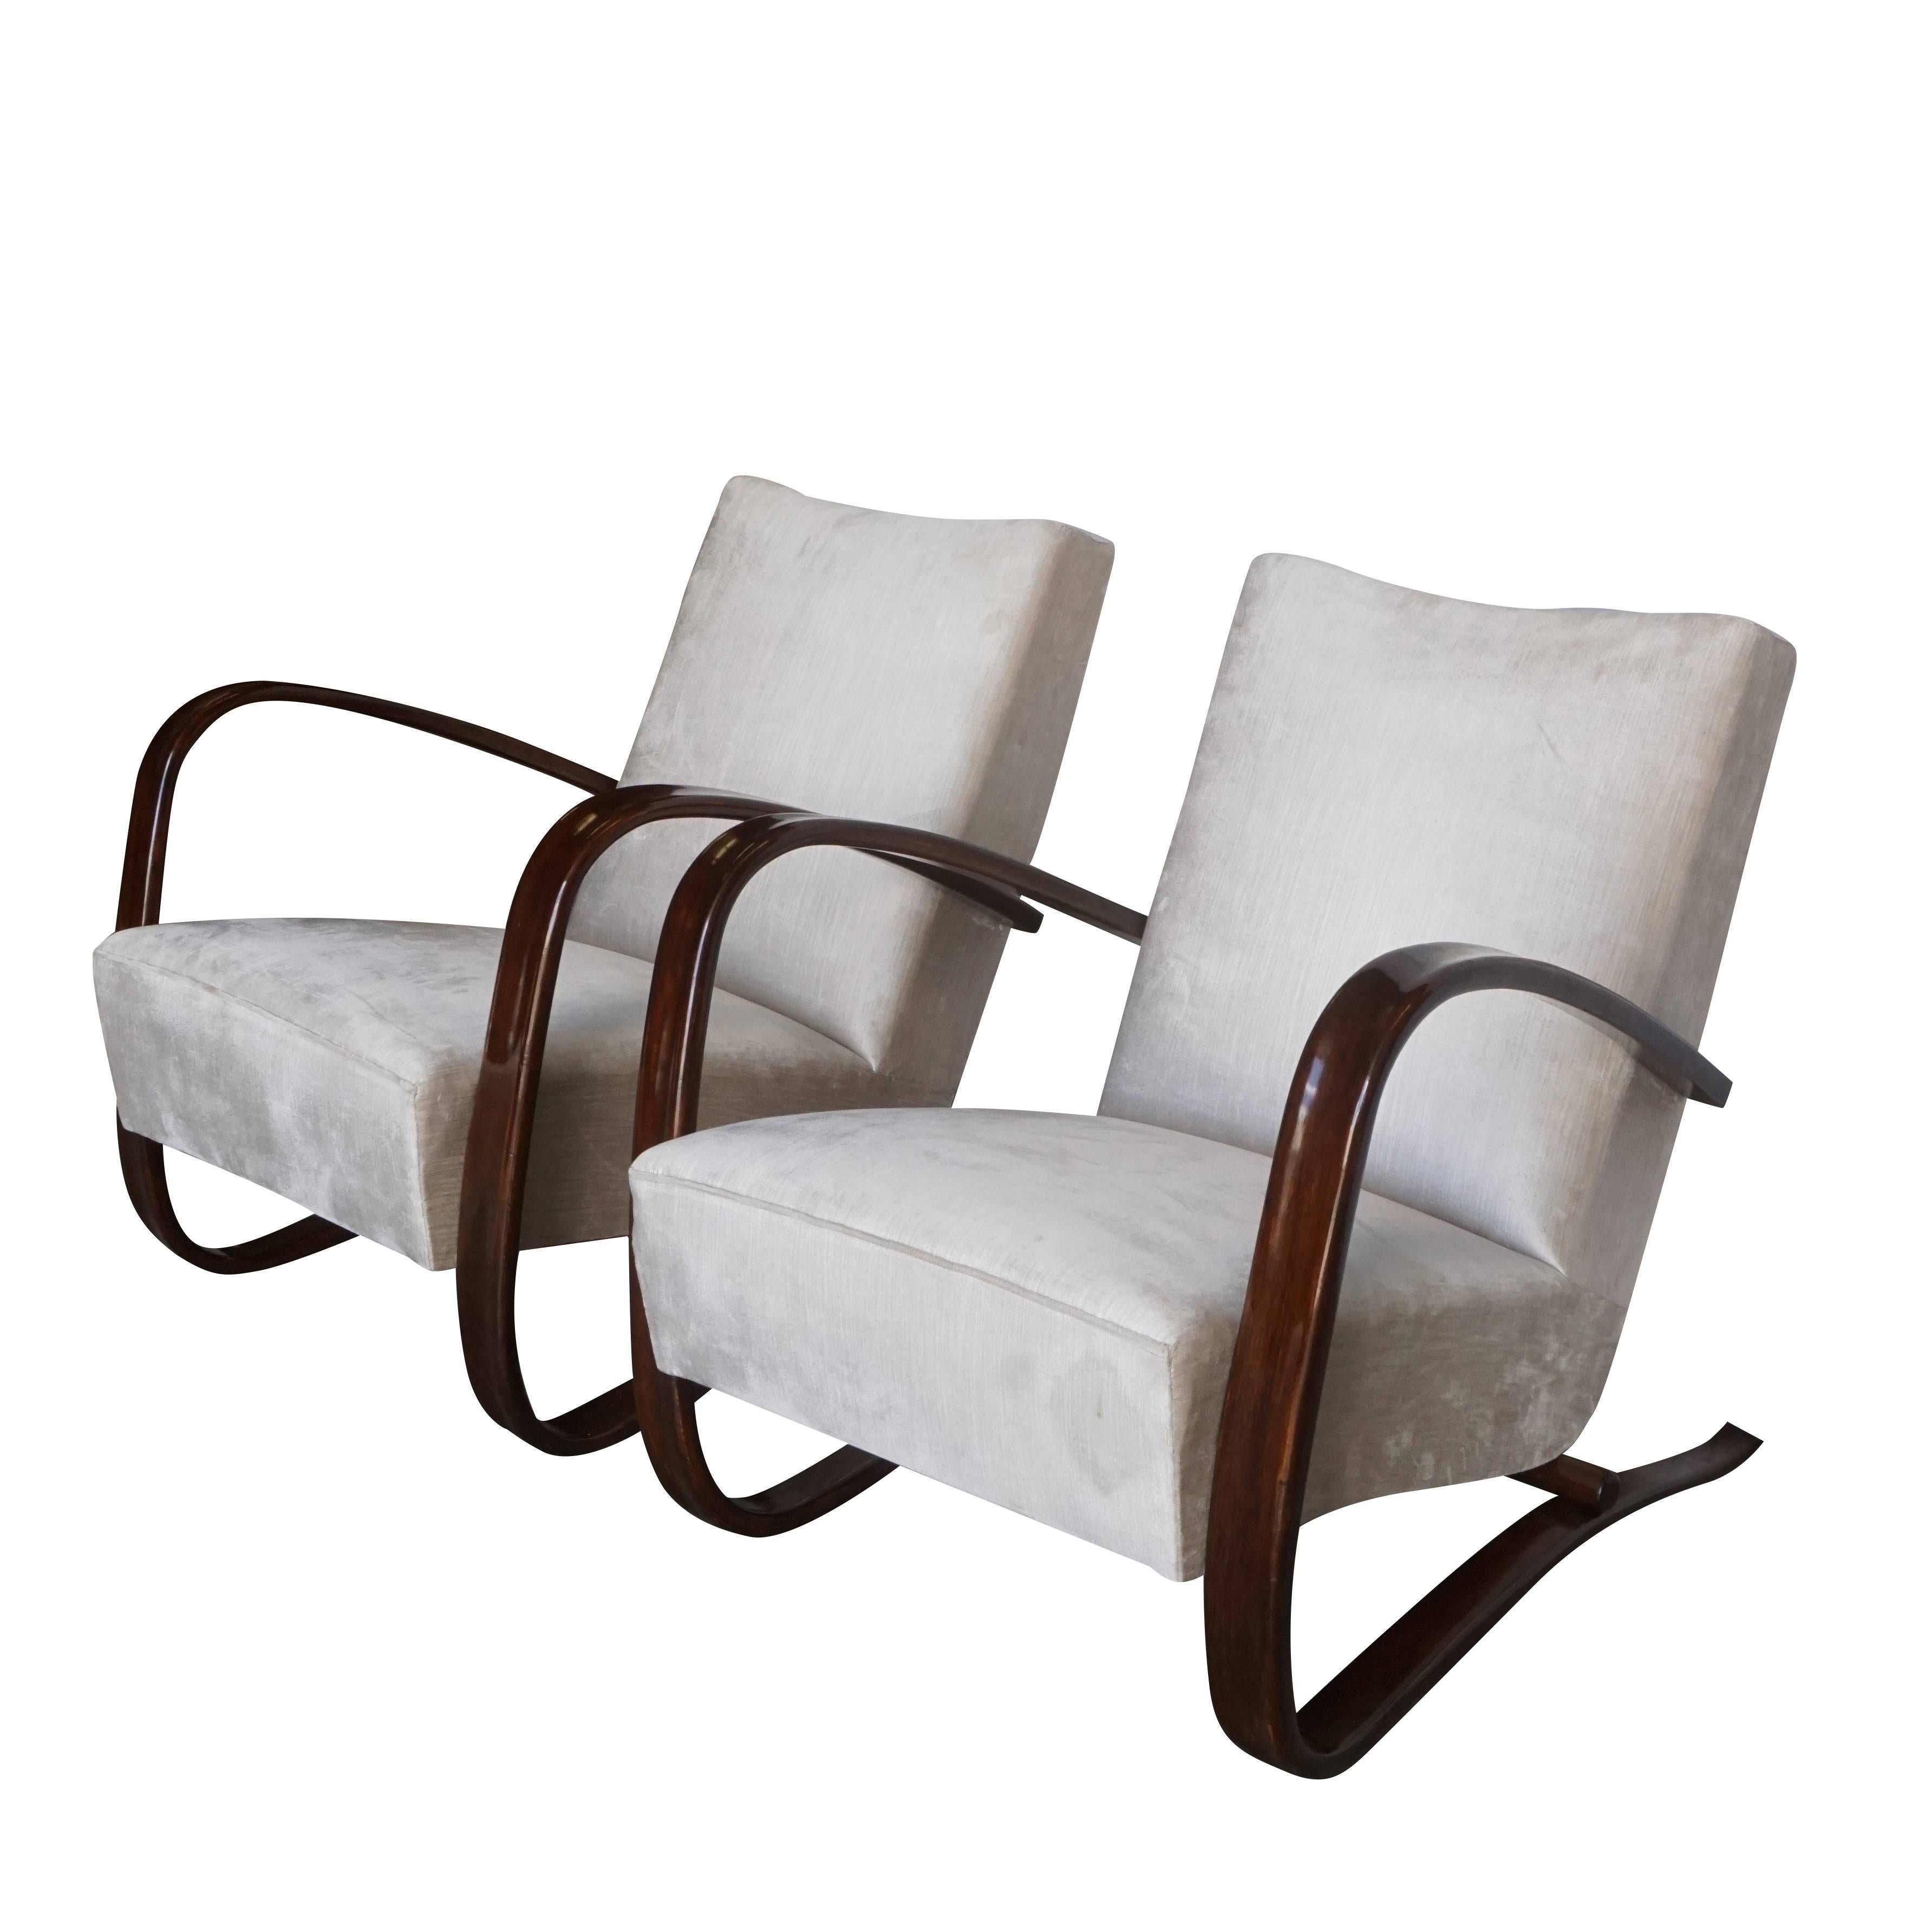 A pair of reupholstered Jindrich Halabala lounge chairs version H-269. Organically shaped bentwood frame designed by renowned German cabinet maker Thonet. The pair is in very good condition with small traces of usage, circa 1930 Czech Republic.